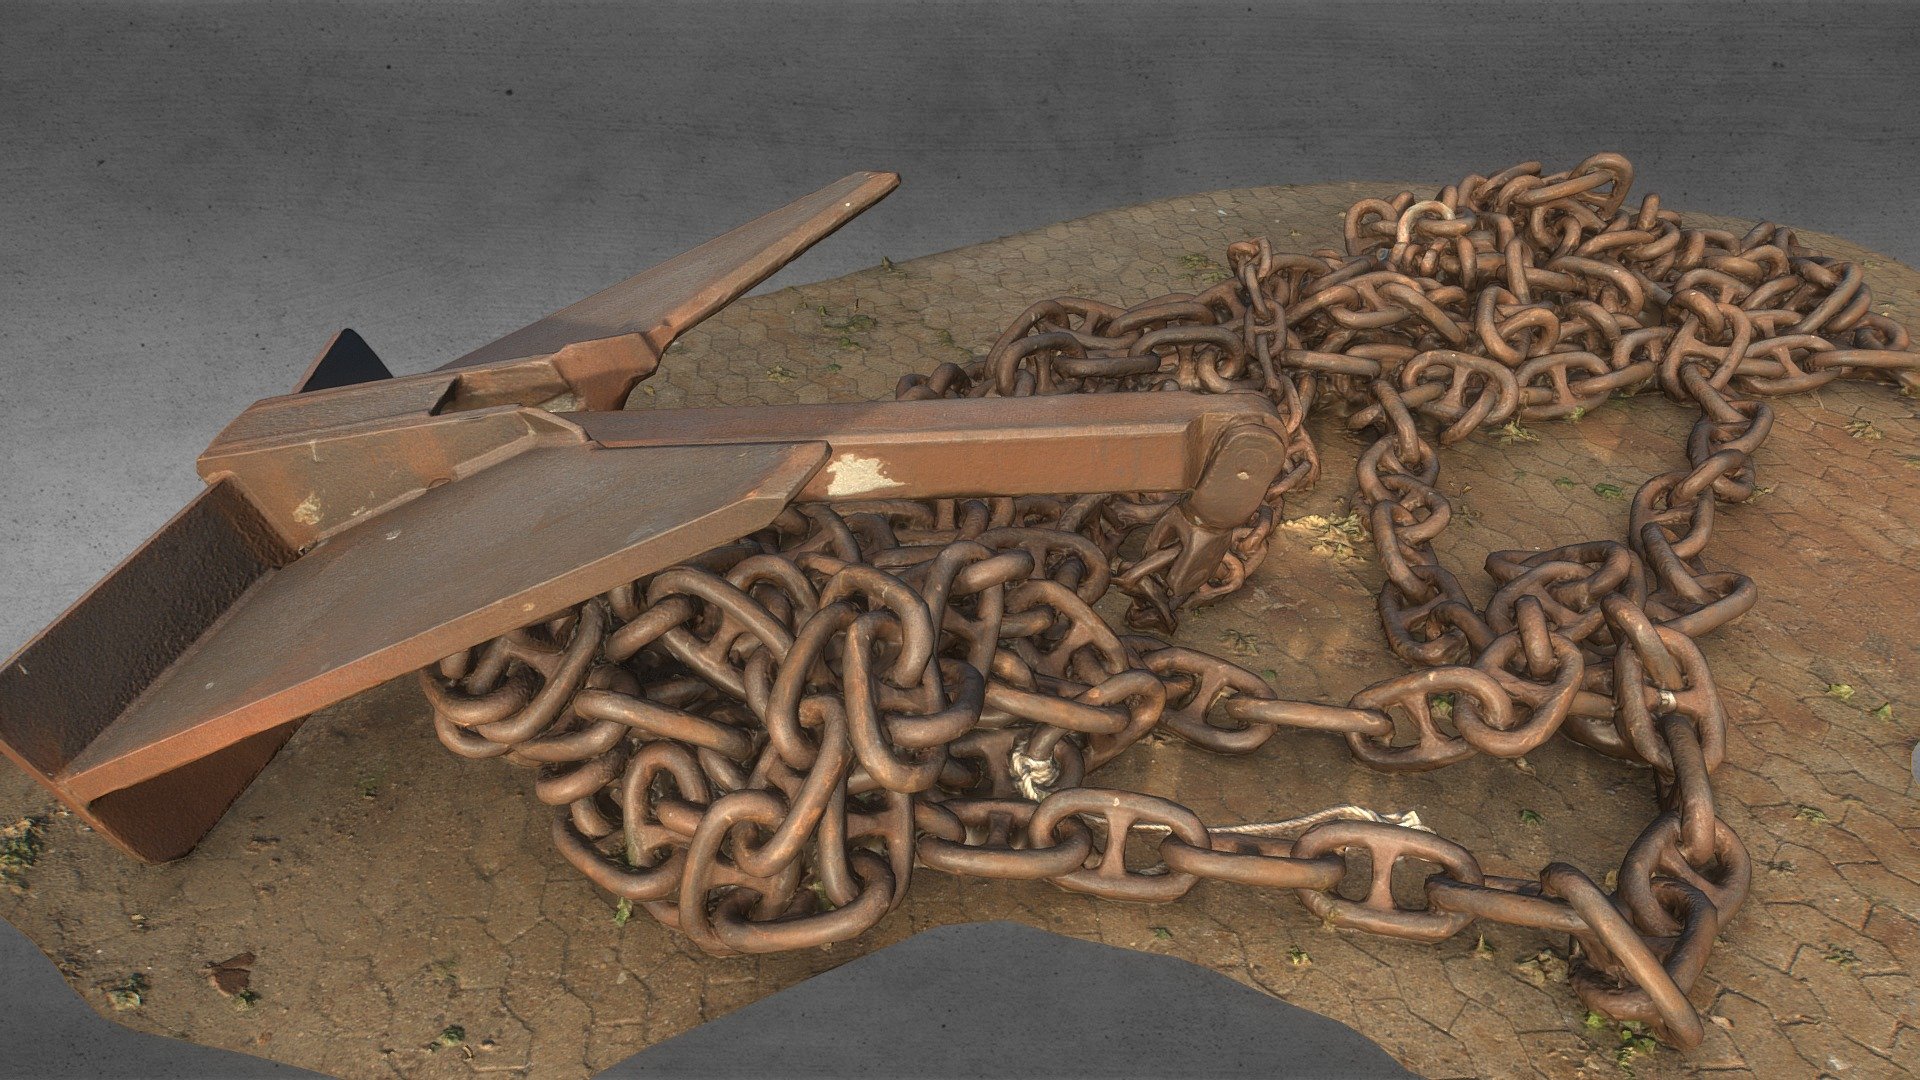 3D model of anchor and attached chains.

Scanned in the harbor of Cuxhaven on a cloudy day. Since the lighting condition were pretty good I managed to have sharp and consistent photos resulting in a good quality scan 3d model